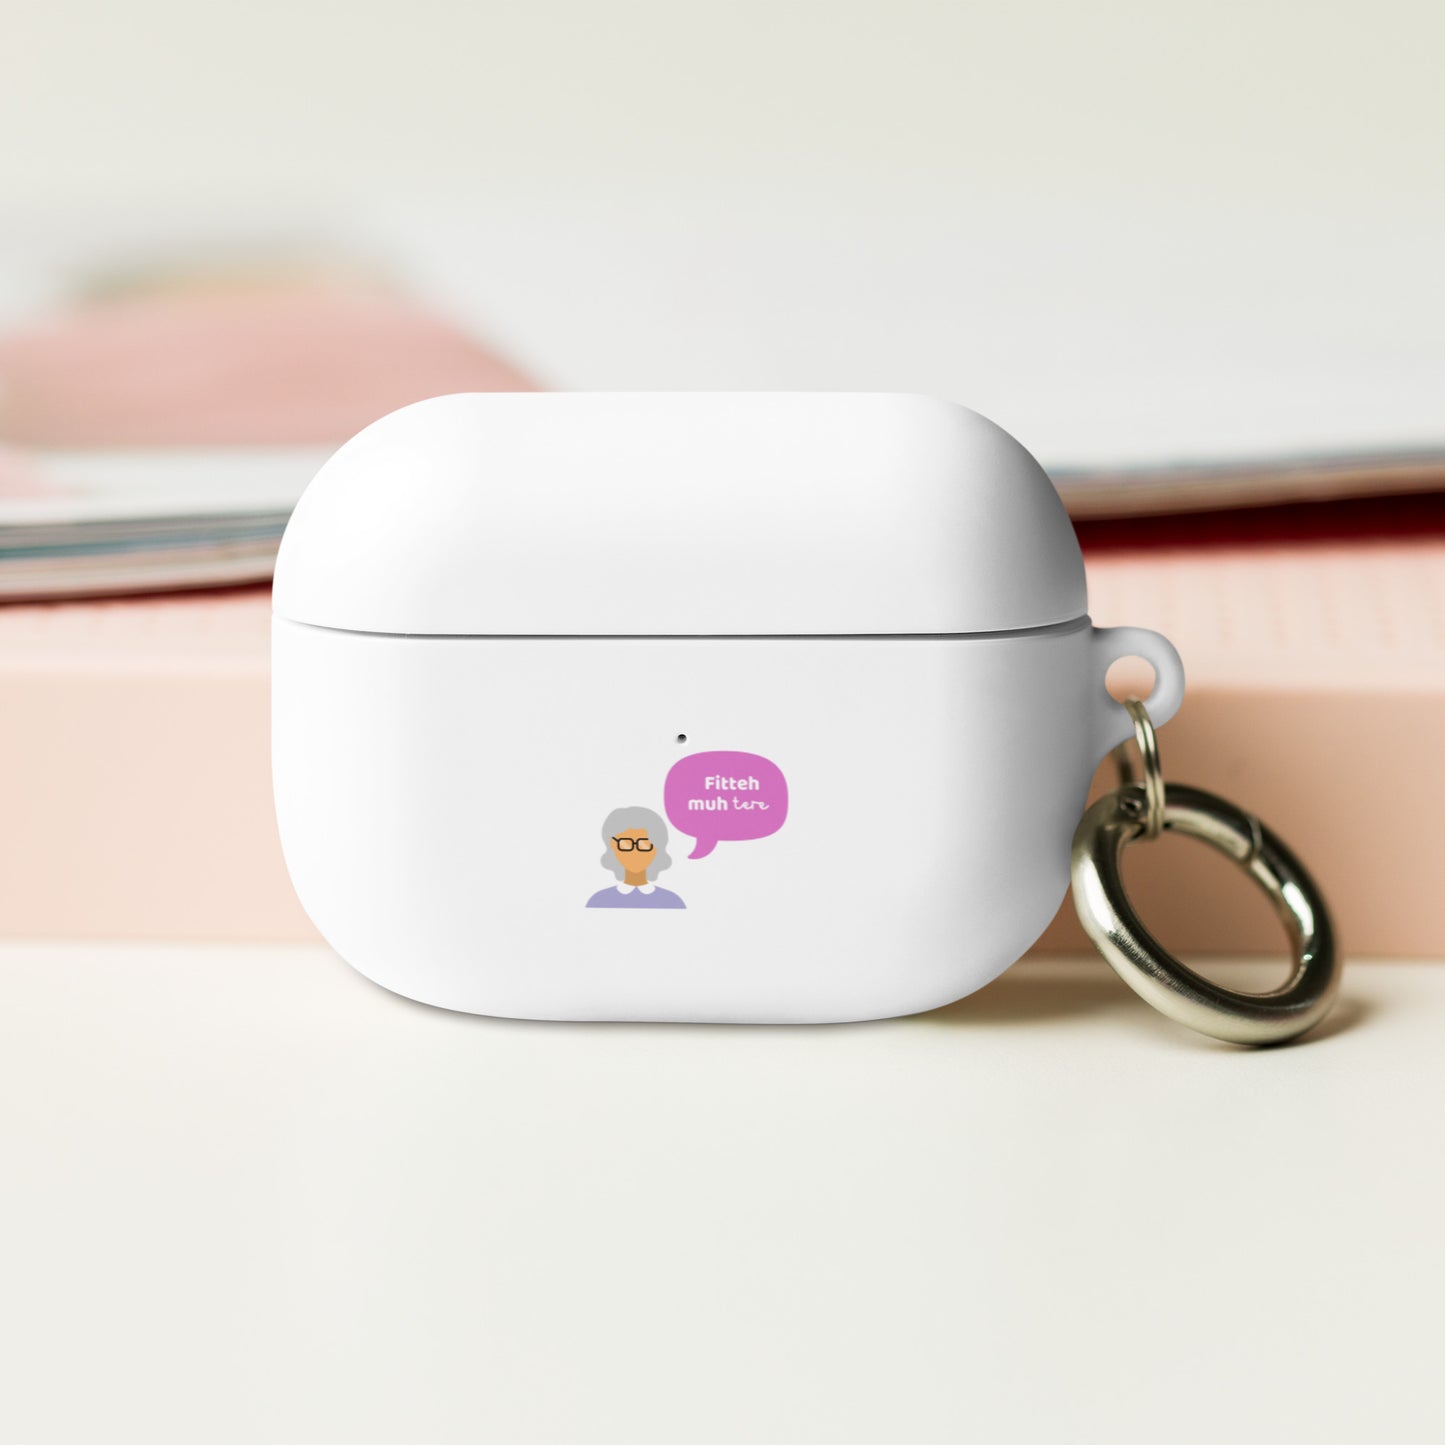 Fitteh Muh - AirPods case